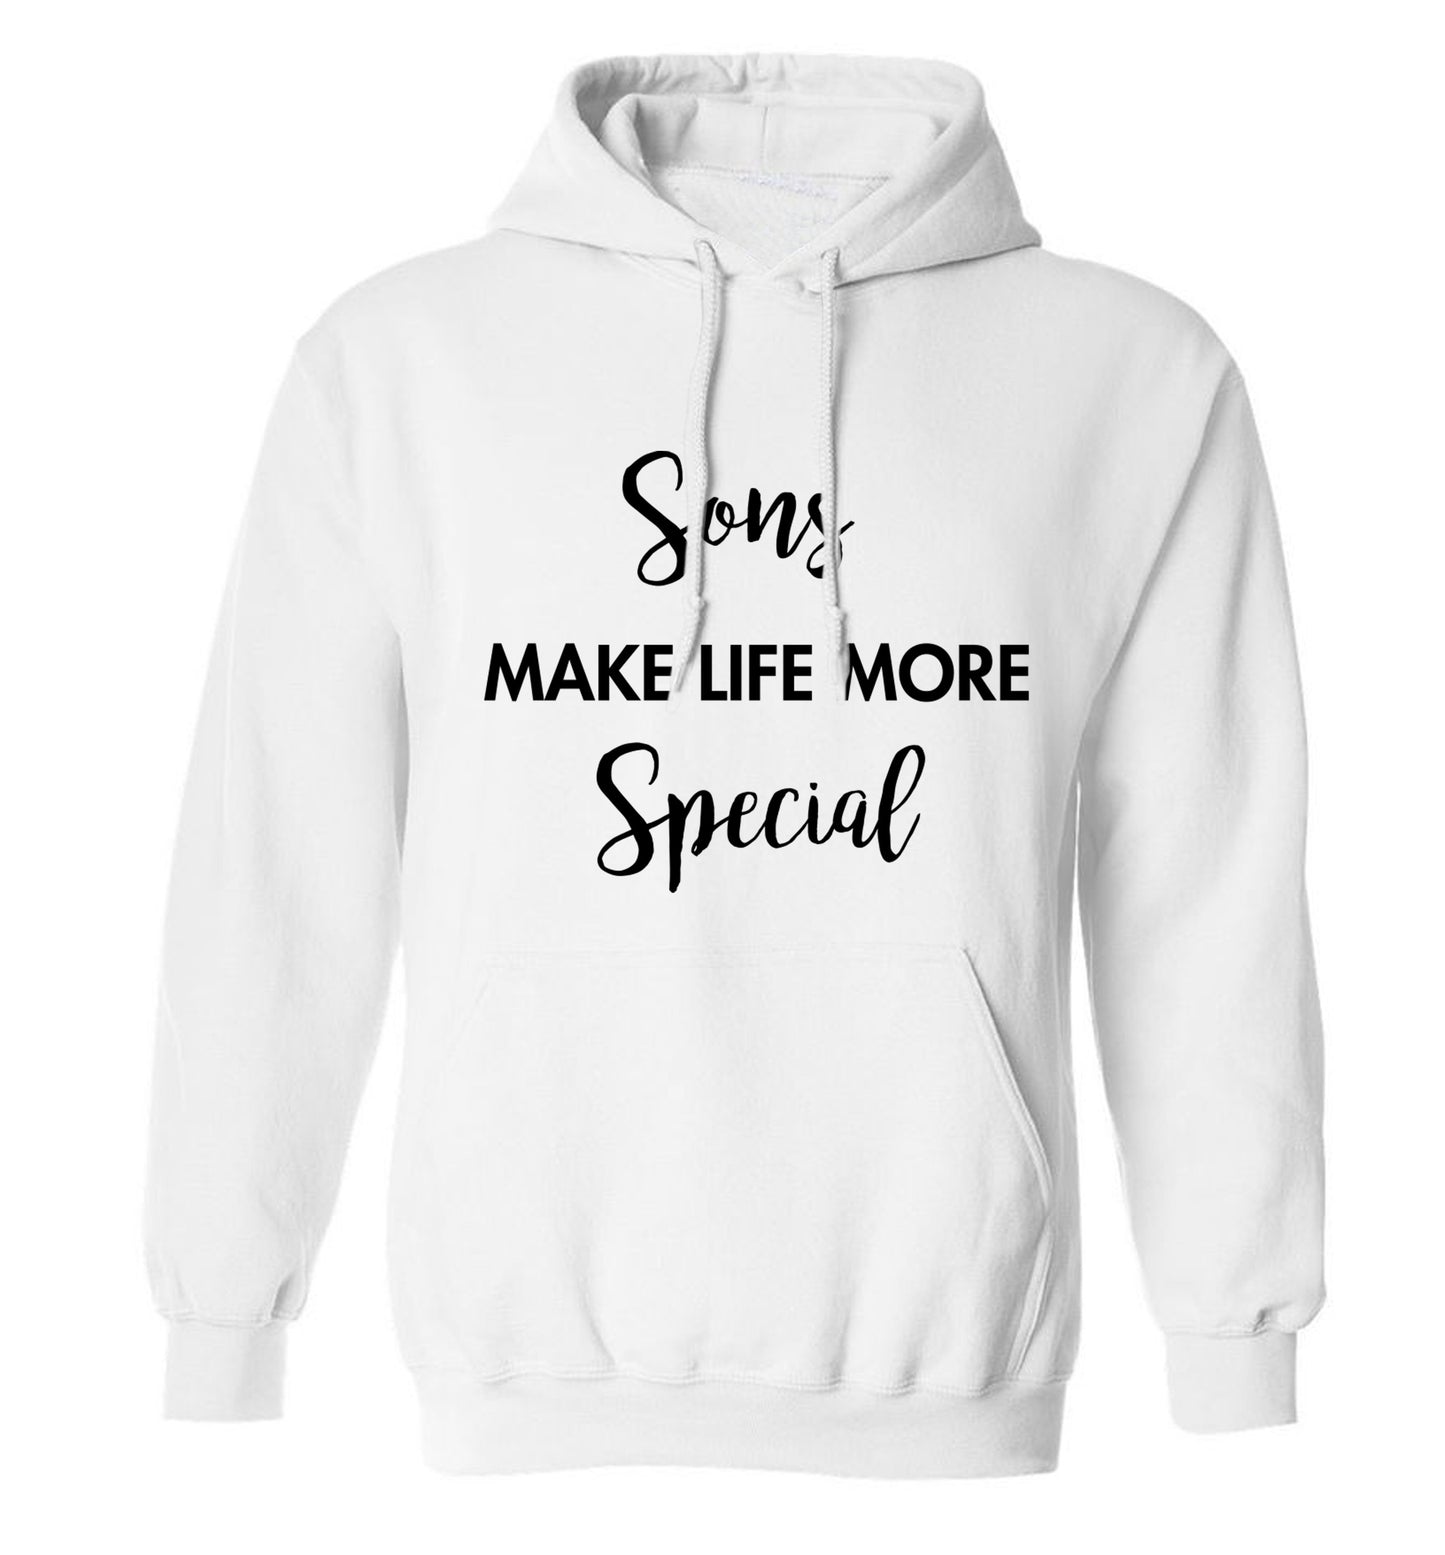 Daughters make life more special adults unisex white hoodie 2XL